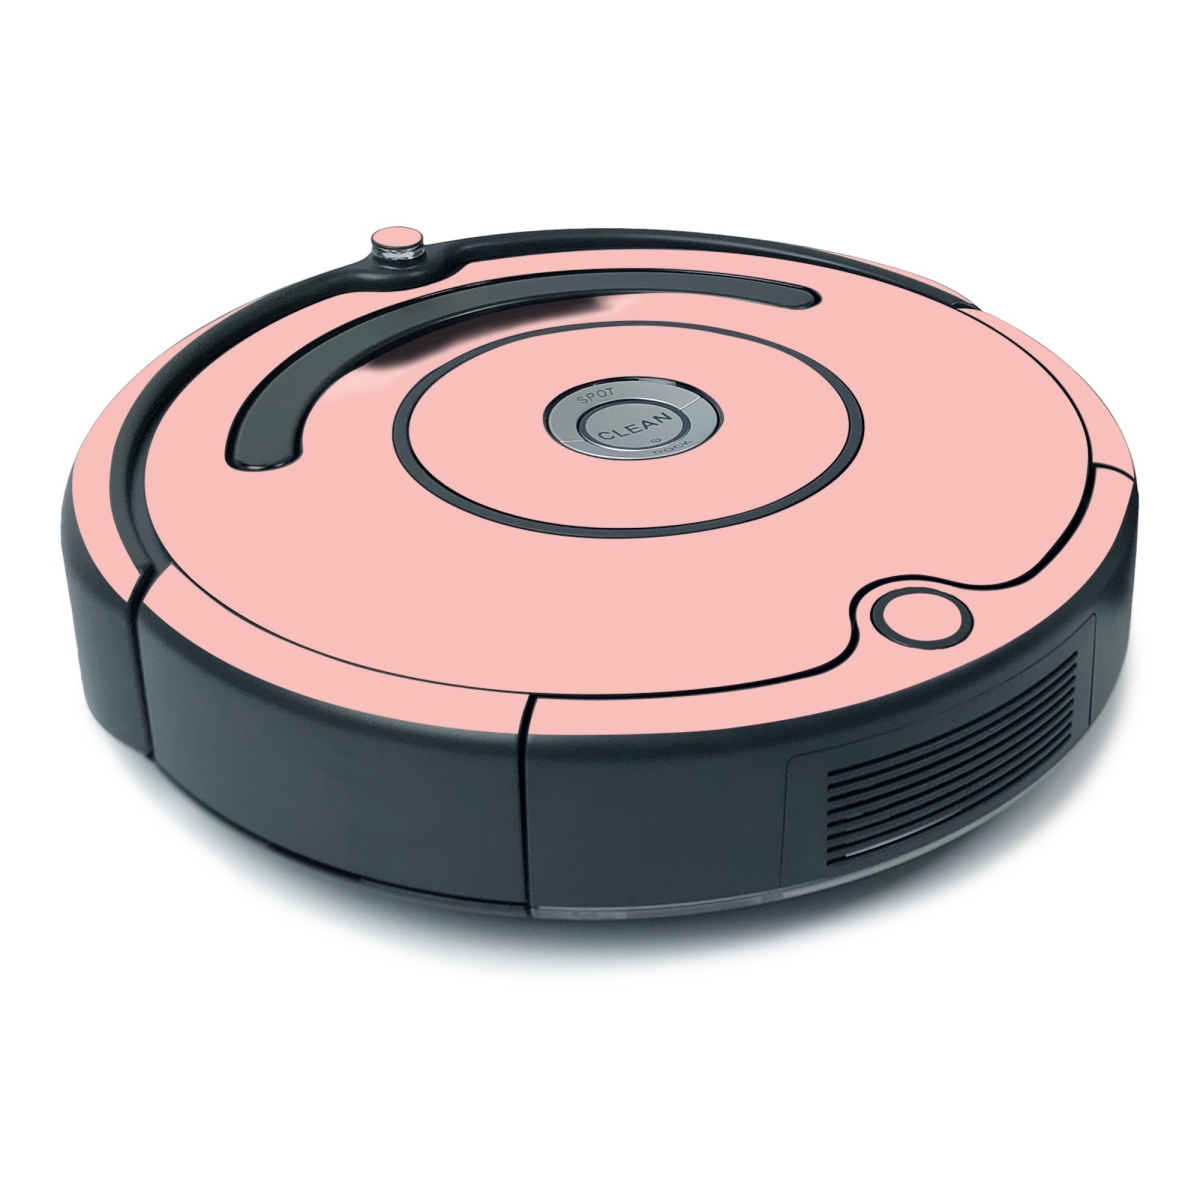 Picture of MightySkins IRRO675MIN-Solid Blush Skin for iRobot Roomba 675 Minimal Coverage - Solid Blush